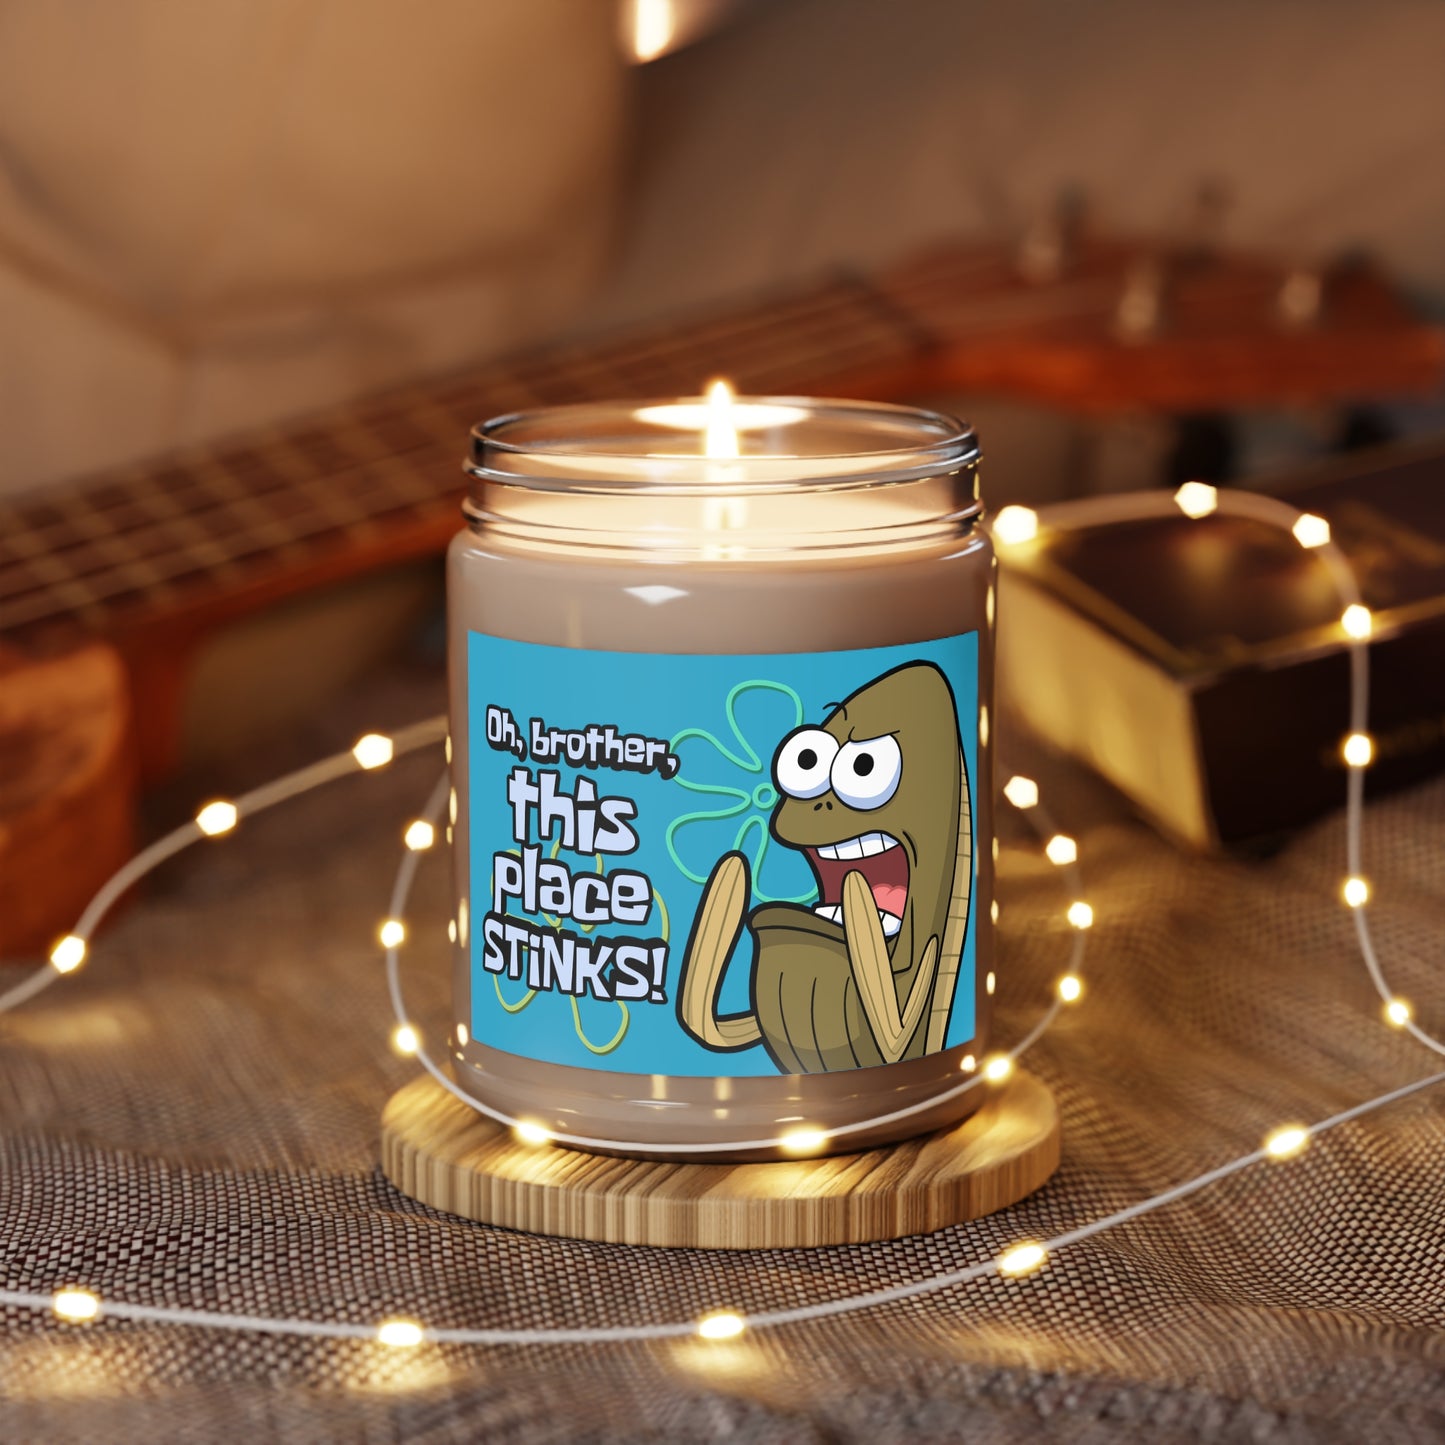 Oh Brother, This Place Stinks scented candle